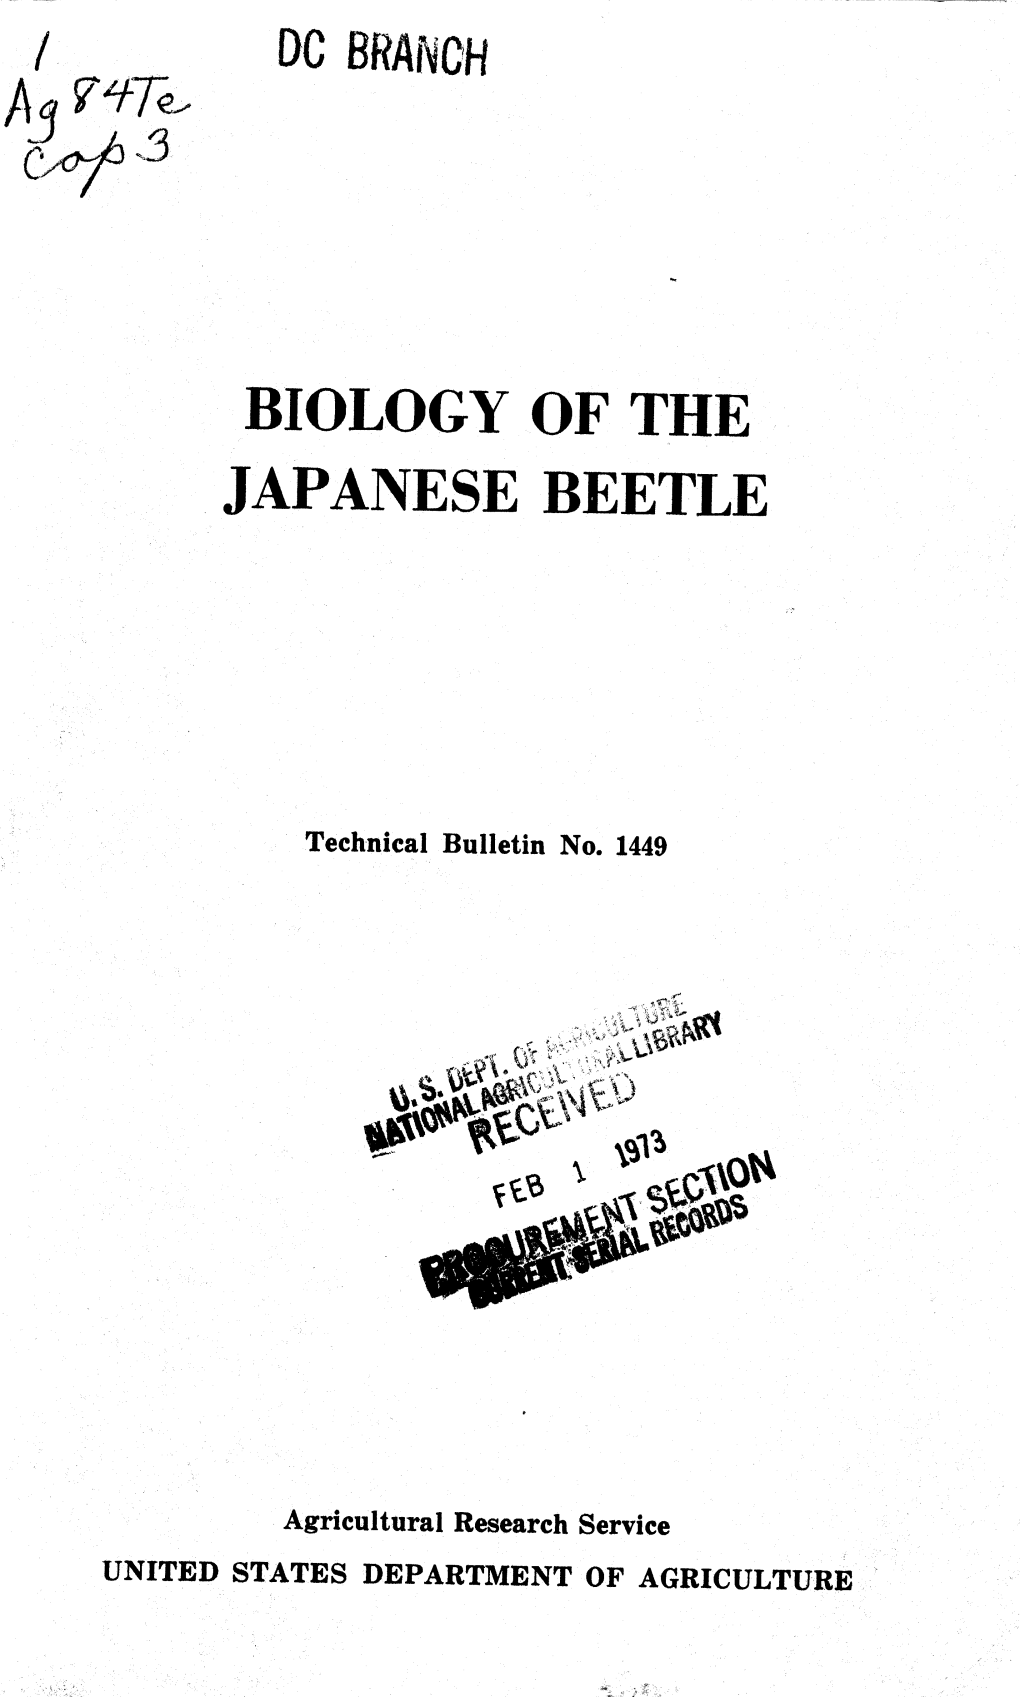 Biology of the Japanese Beetle